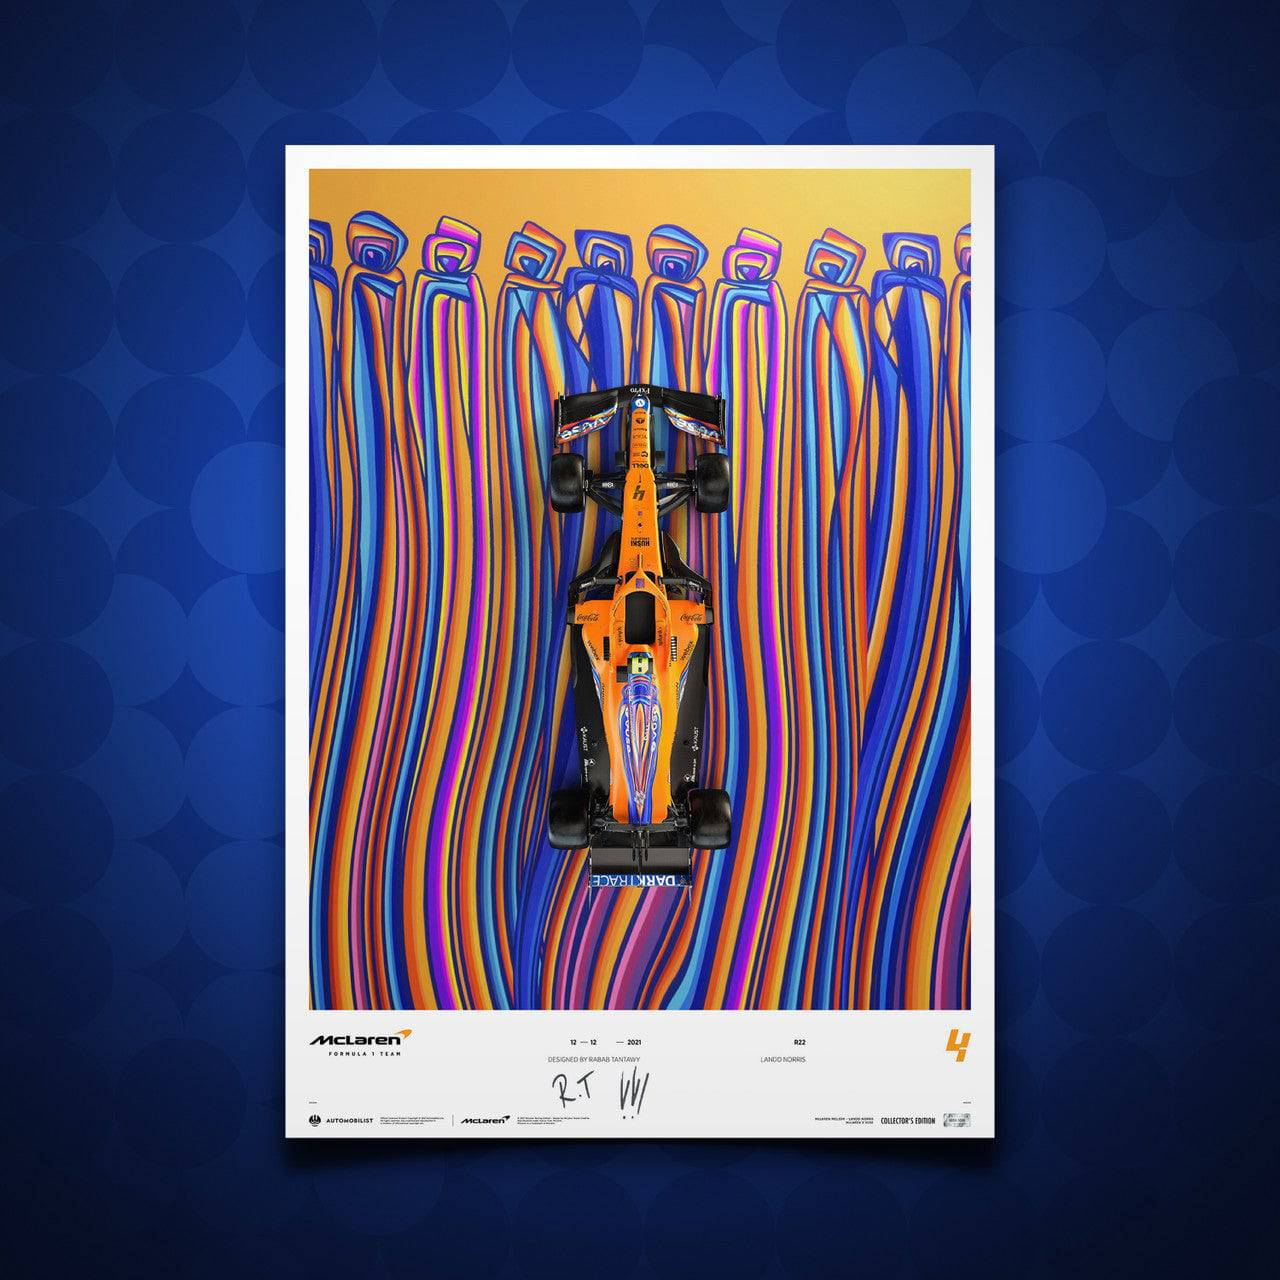 Signed by Rabab Tantawy - McLaren x Vuse - Lando Norris - Driven by Change - 2021 | Collector's Edition